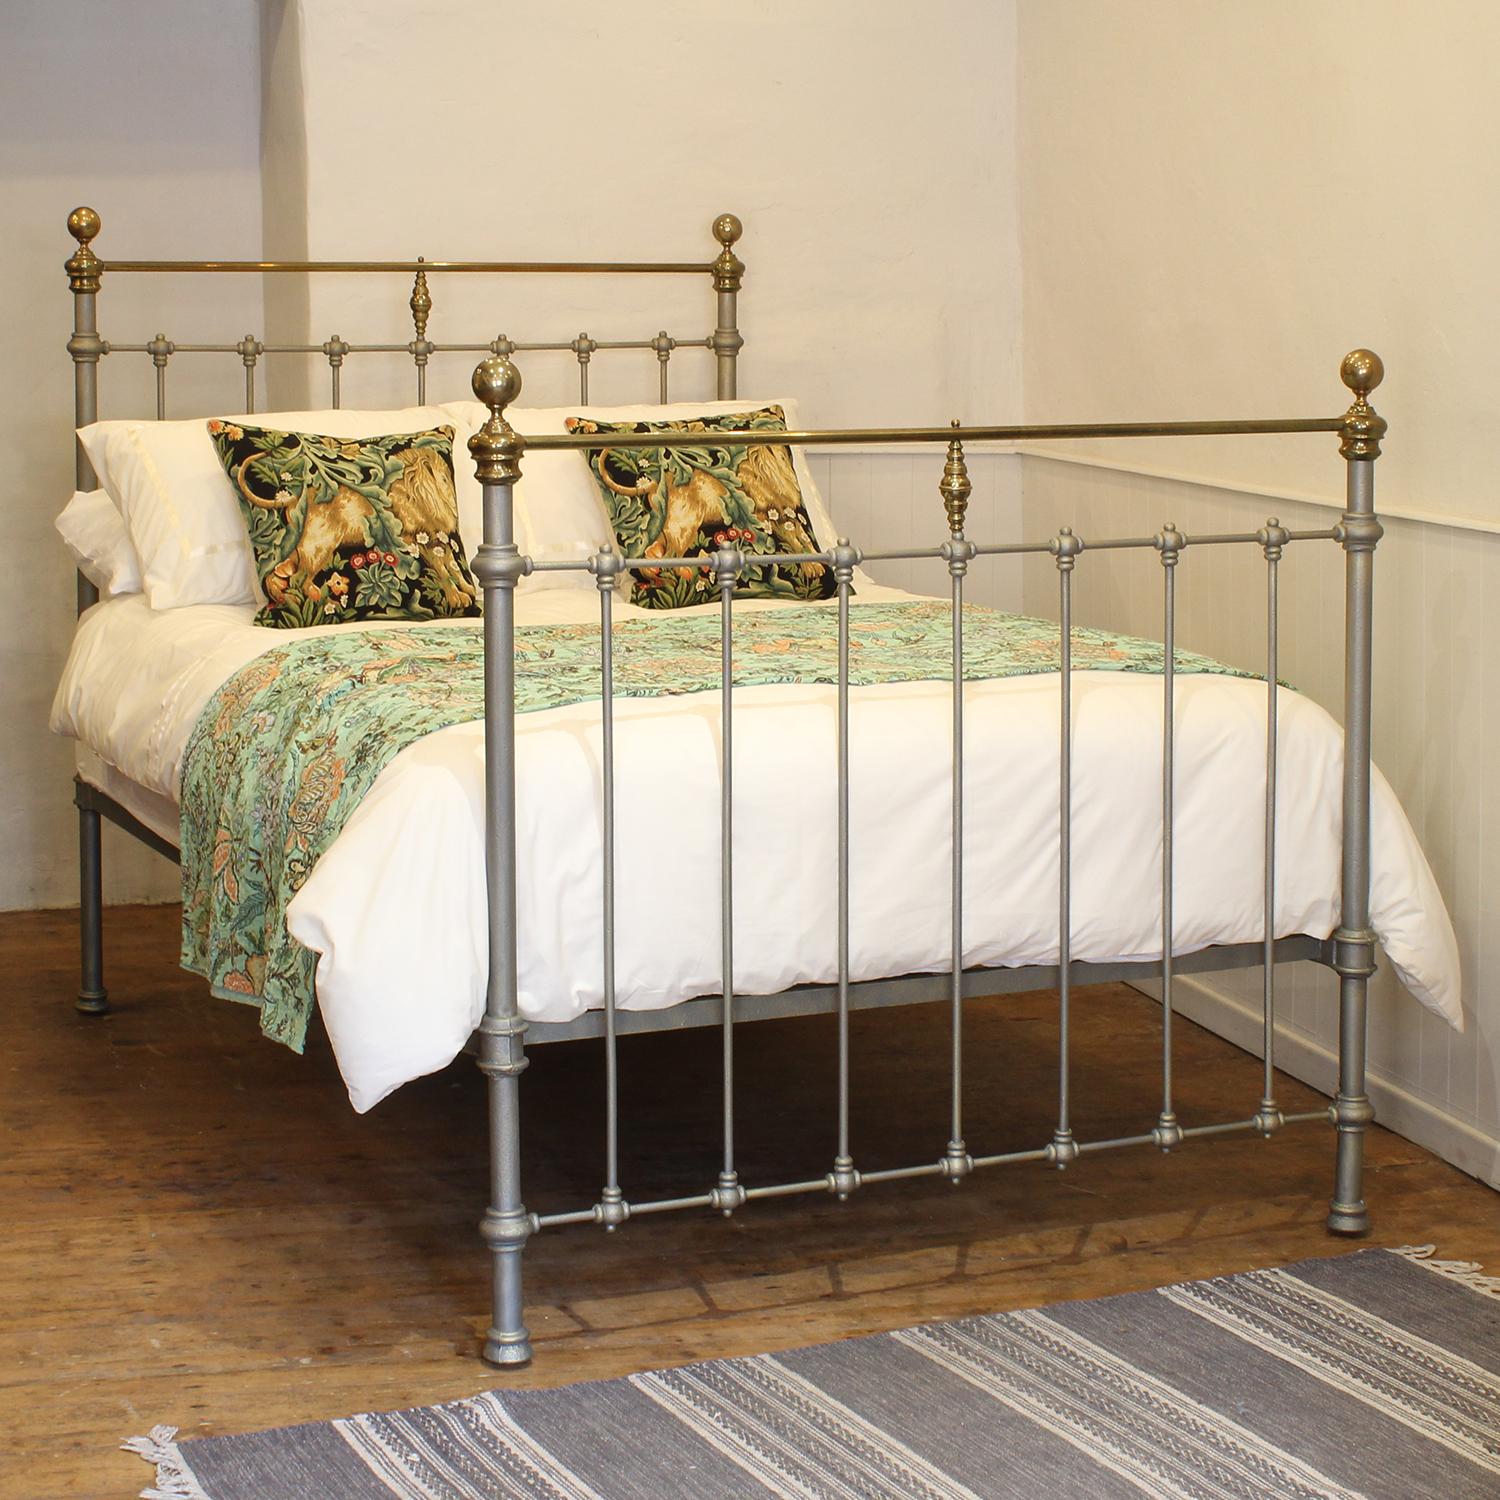 A classic style antique bed in green and gold with straight brass top rail, simple castings, and round brass knobs.

This bed accepts a double size (4ft 6in, 54in or 135cm wide) base and mattress set.

The price includes a standard firm bed base to